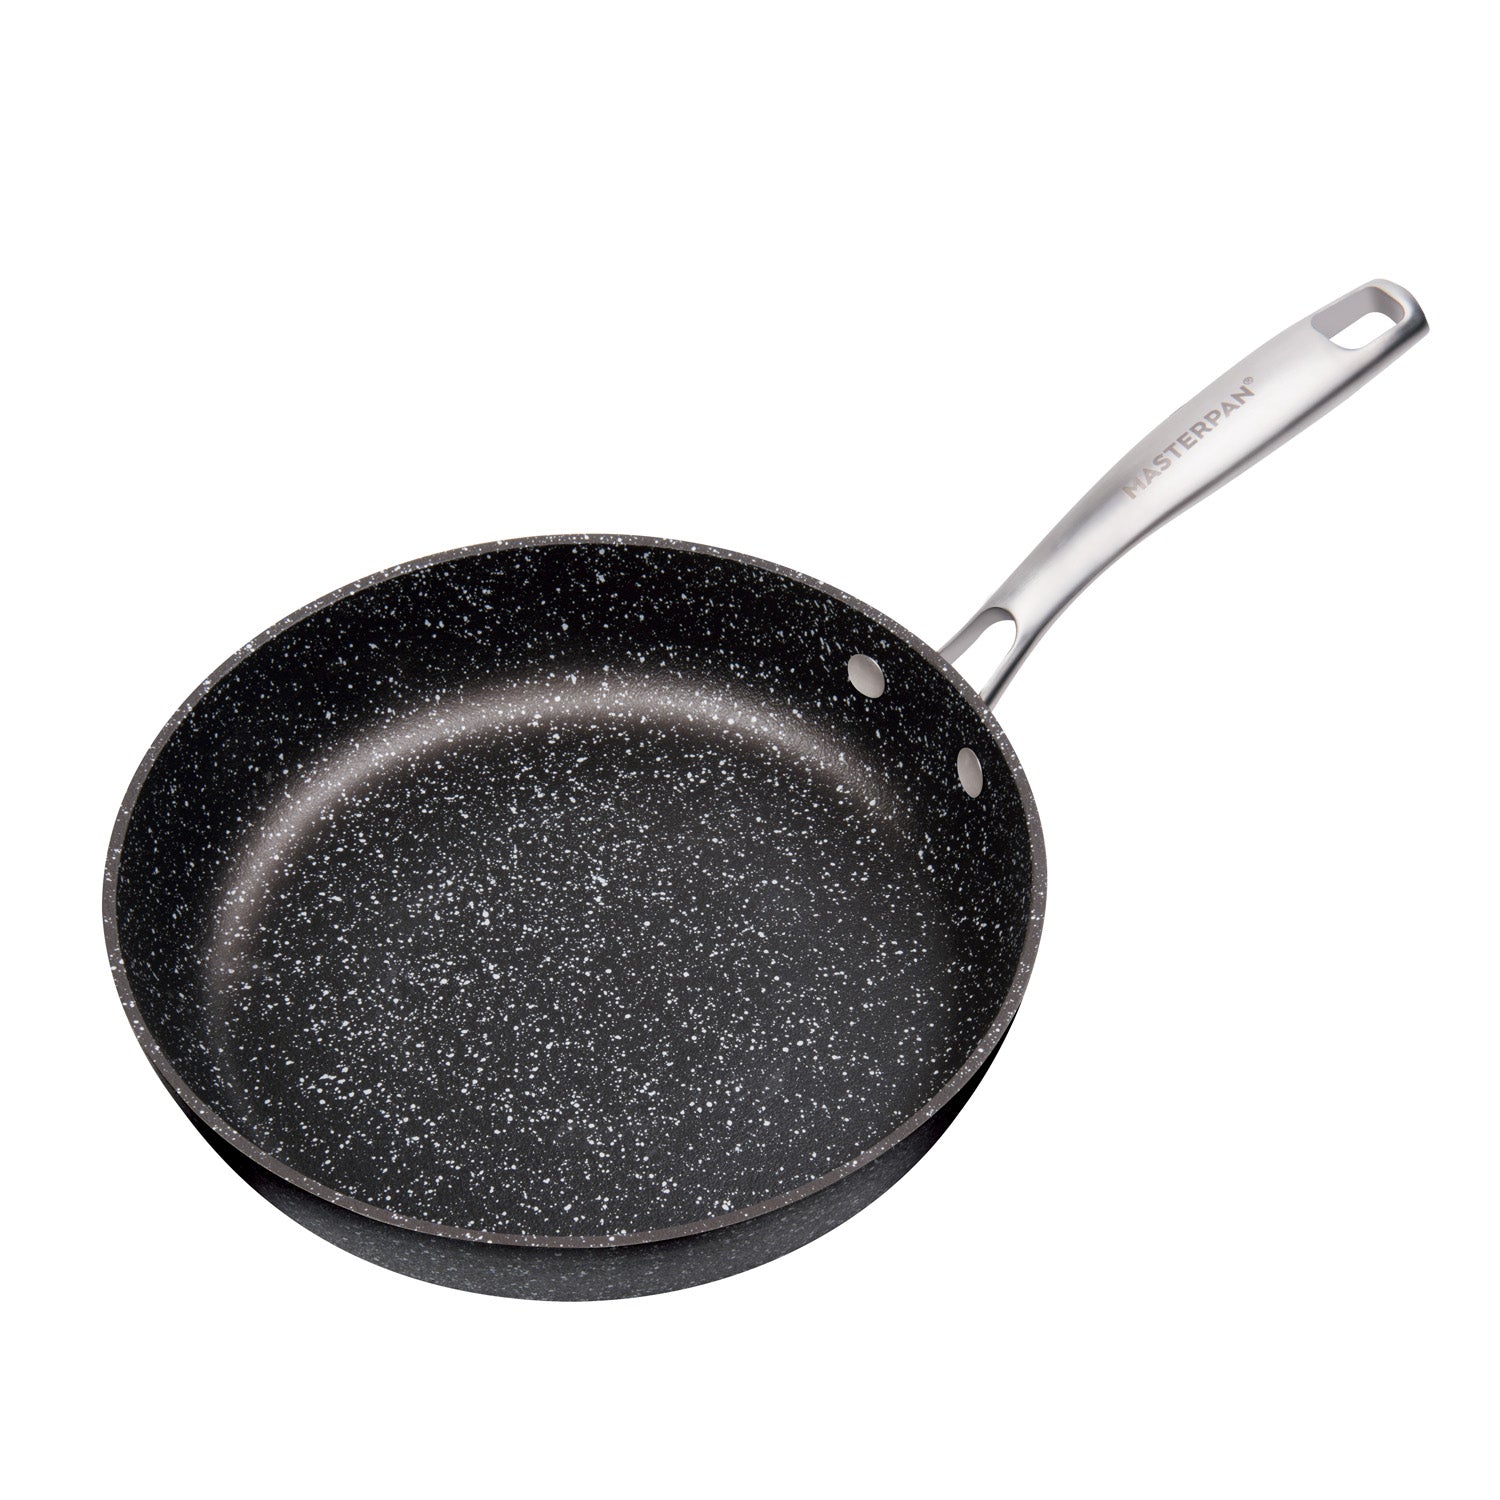 TEATULA Master Pan MP-5S 11 in. Non-Stick 3 Section Meal Skillet